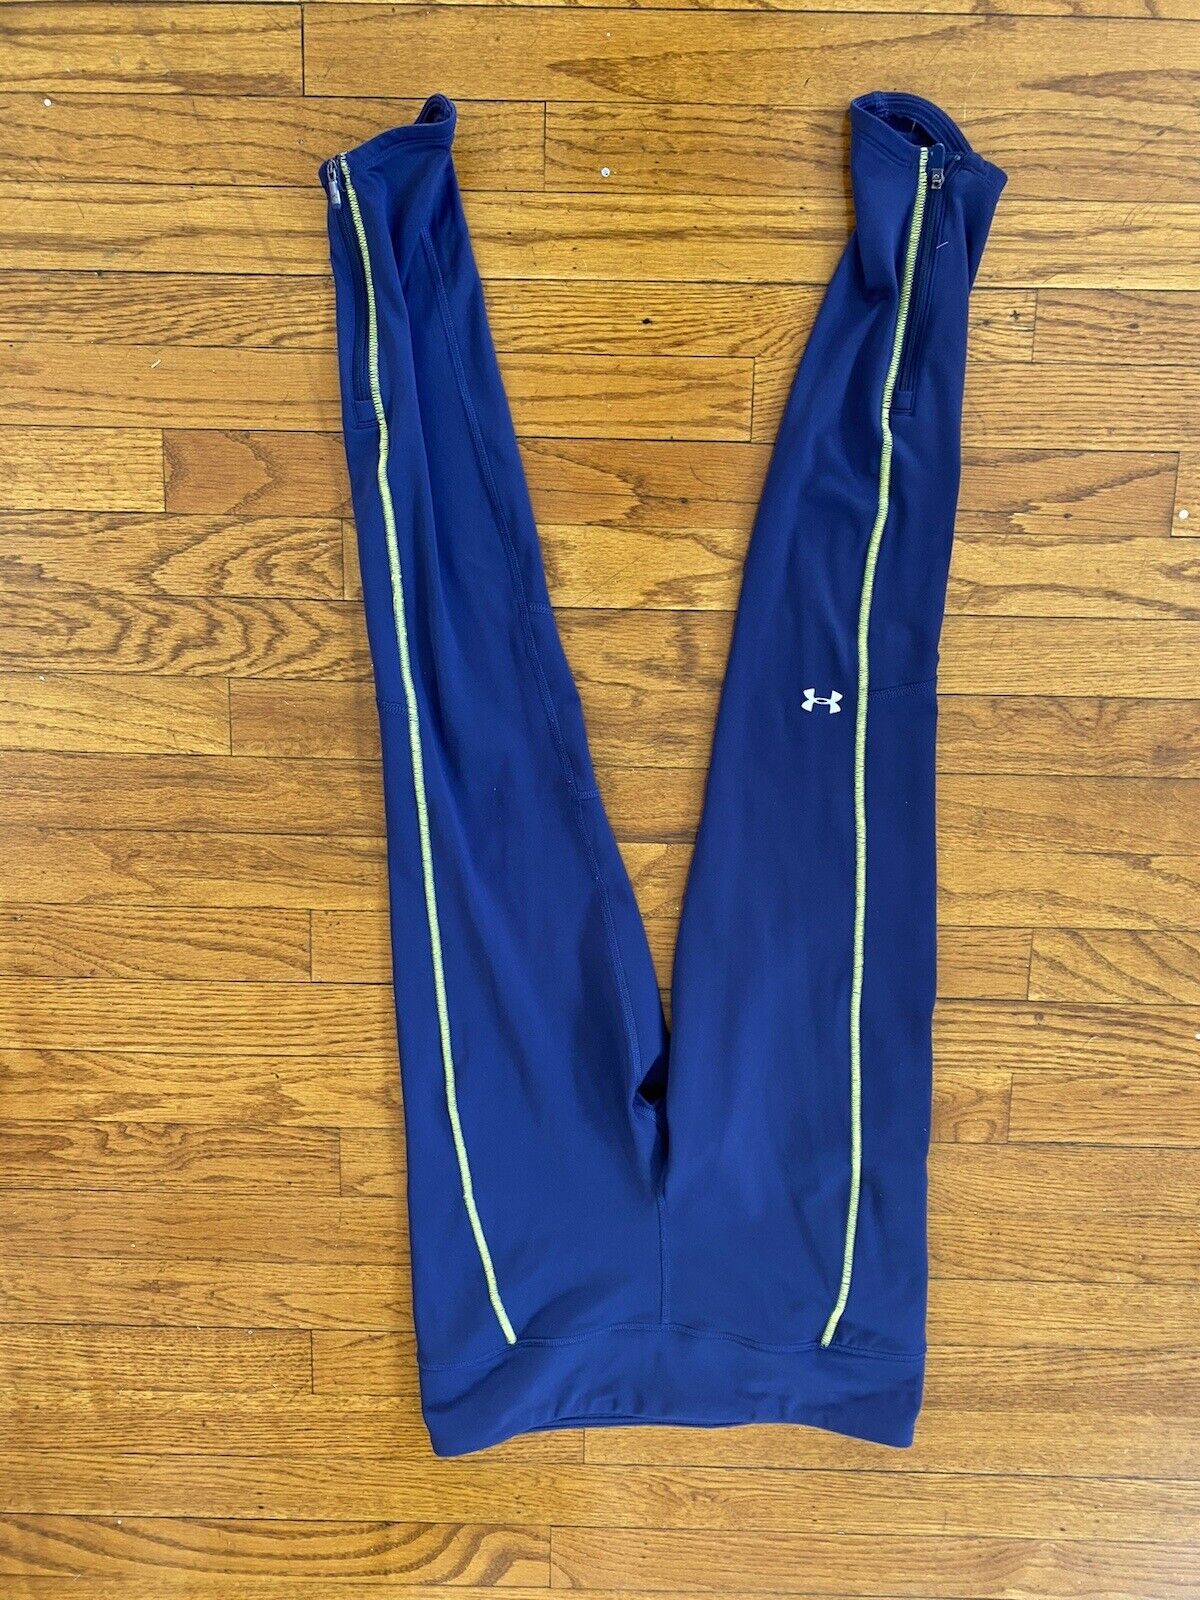 Blue Athletic Leggings - Under Armour - Size Small